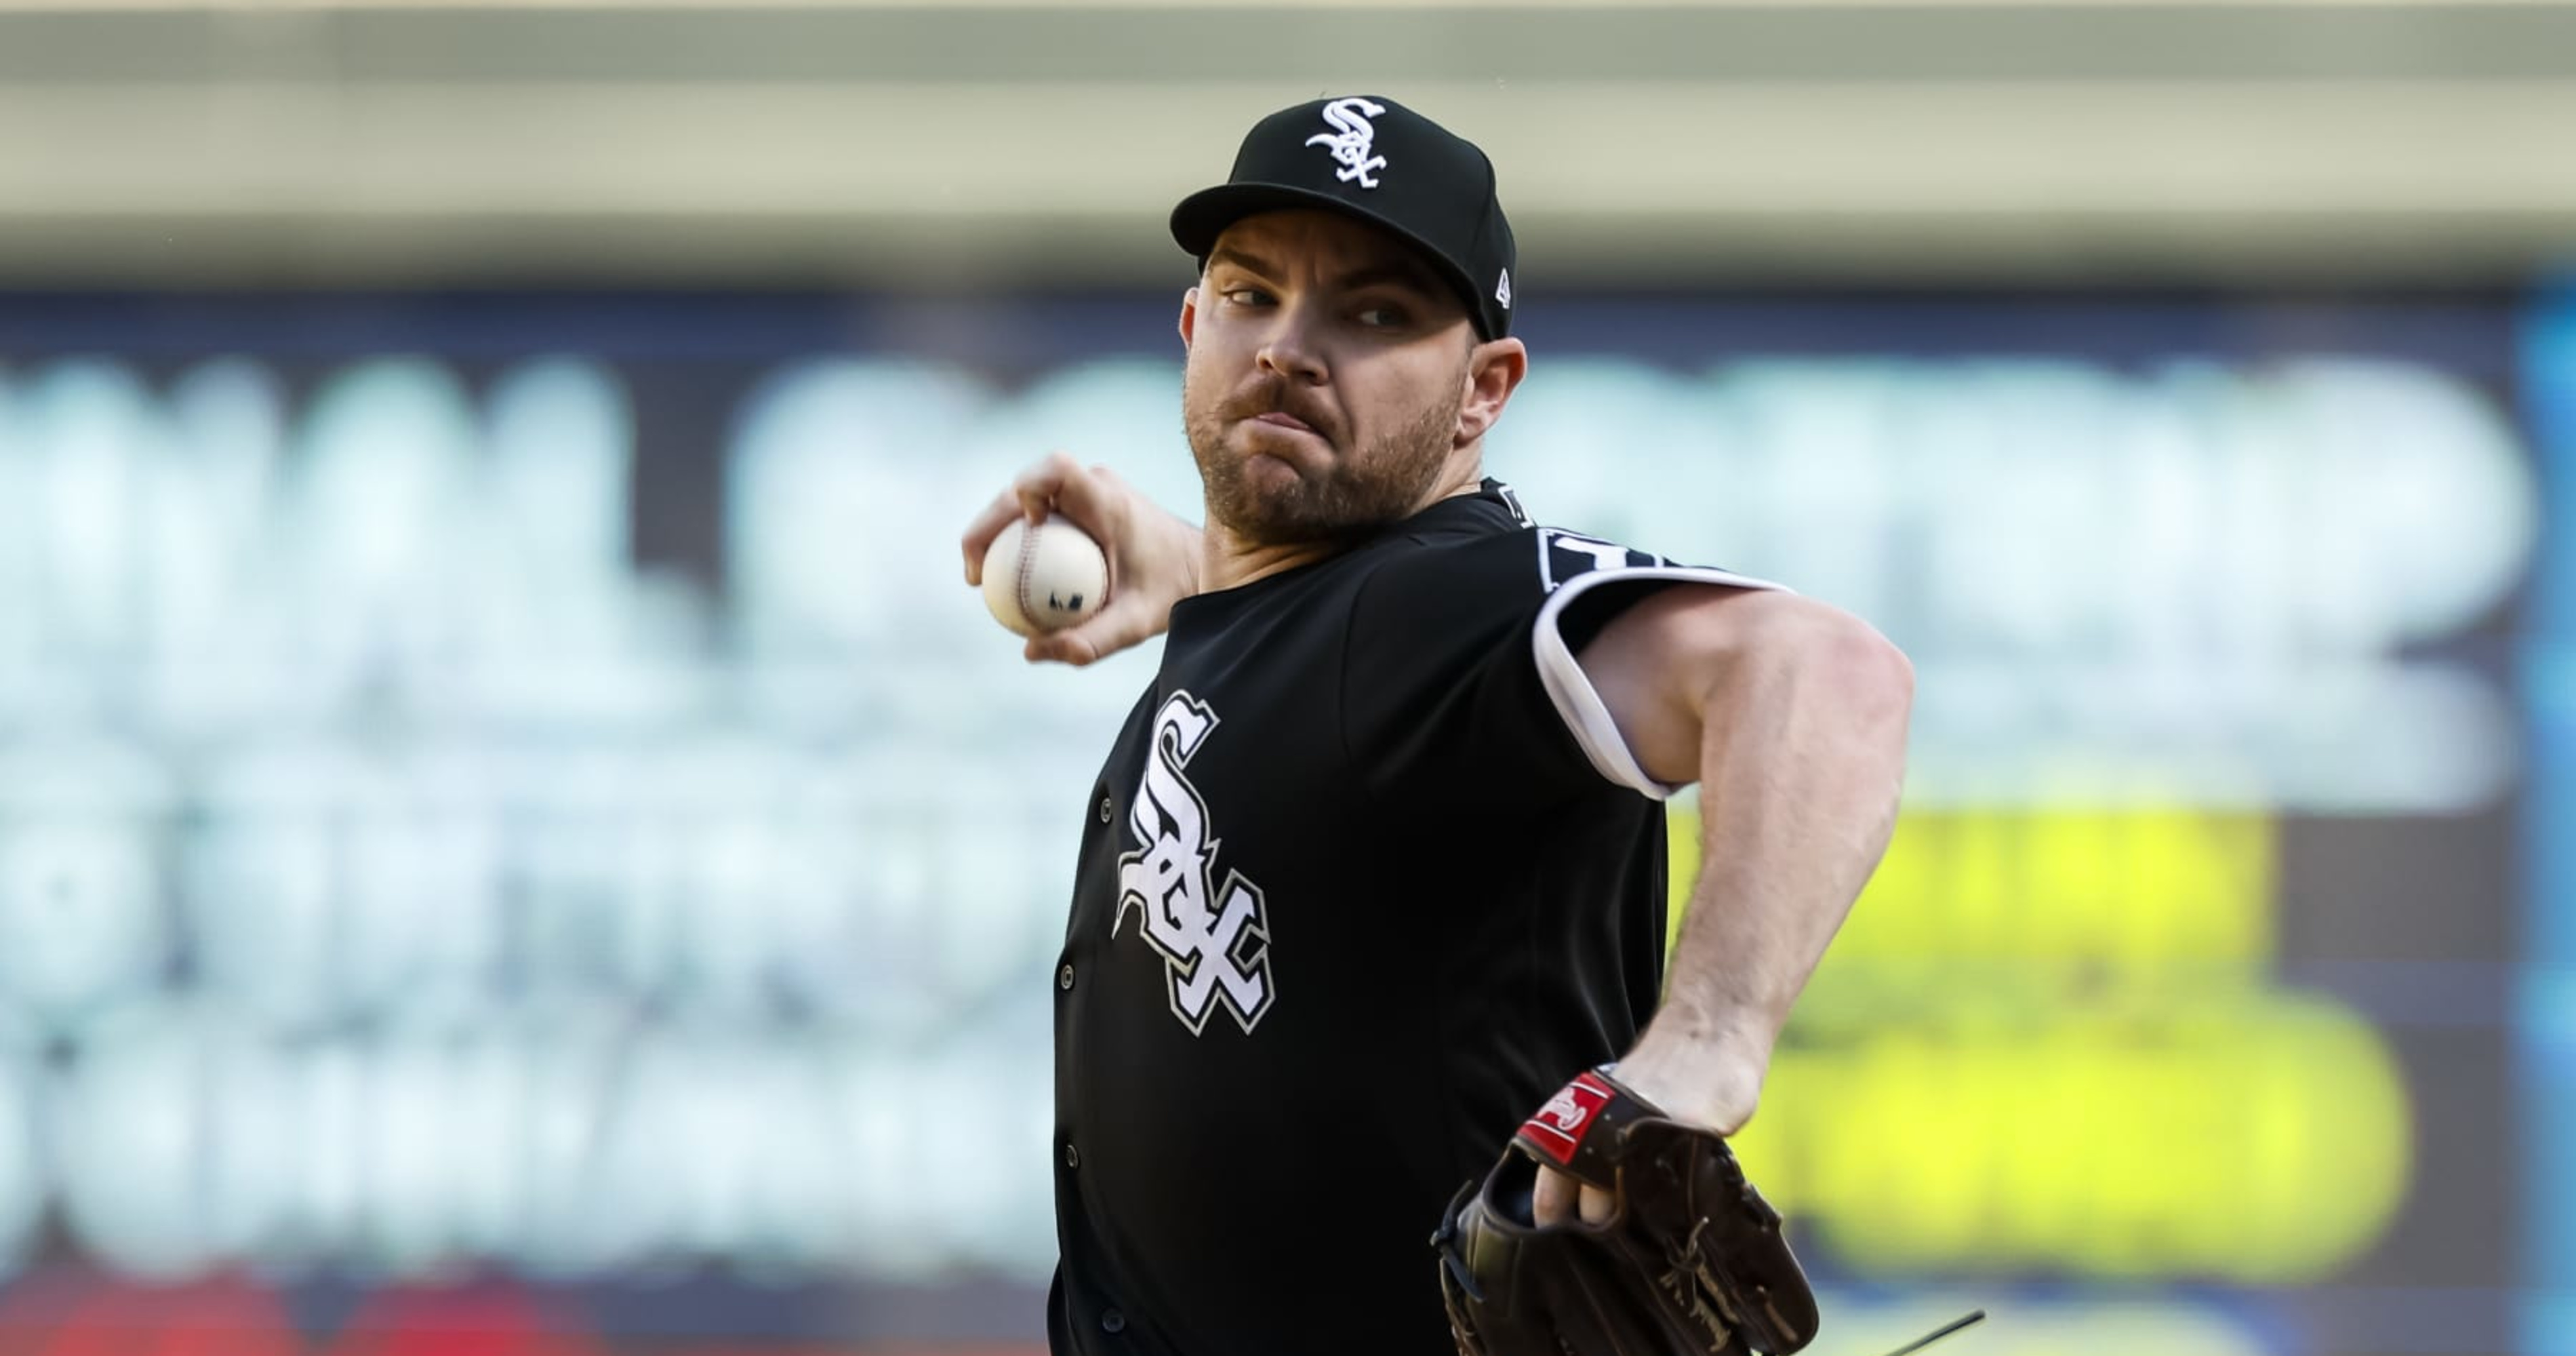 White Sox closer Liam Hendriks expected to make return to team